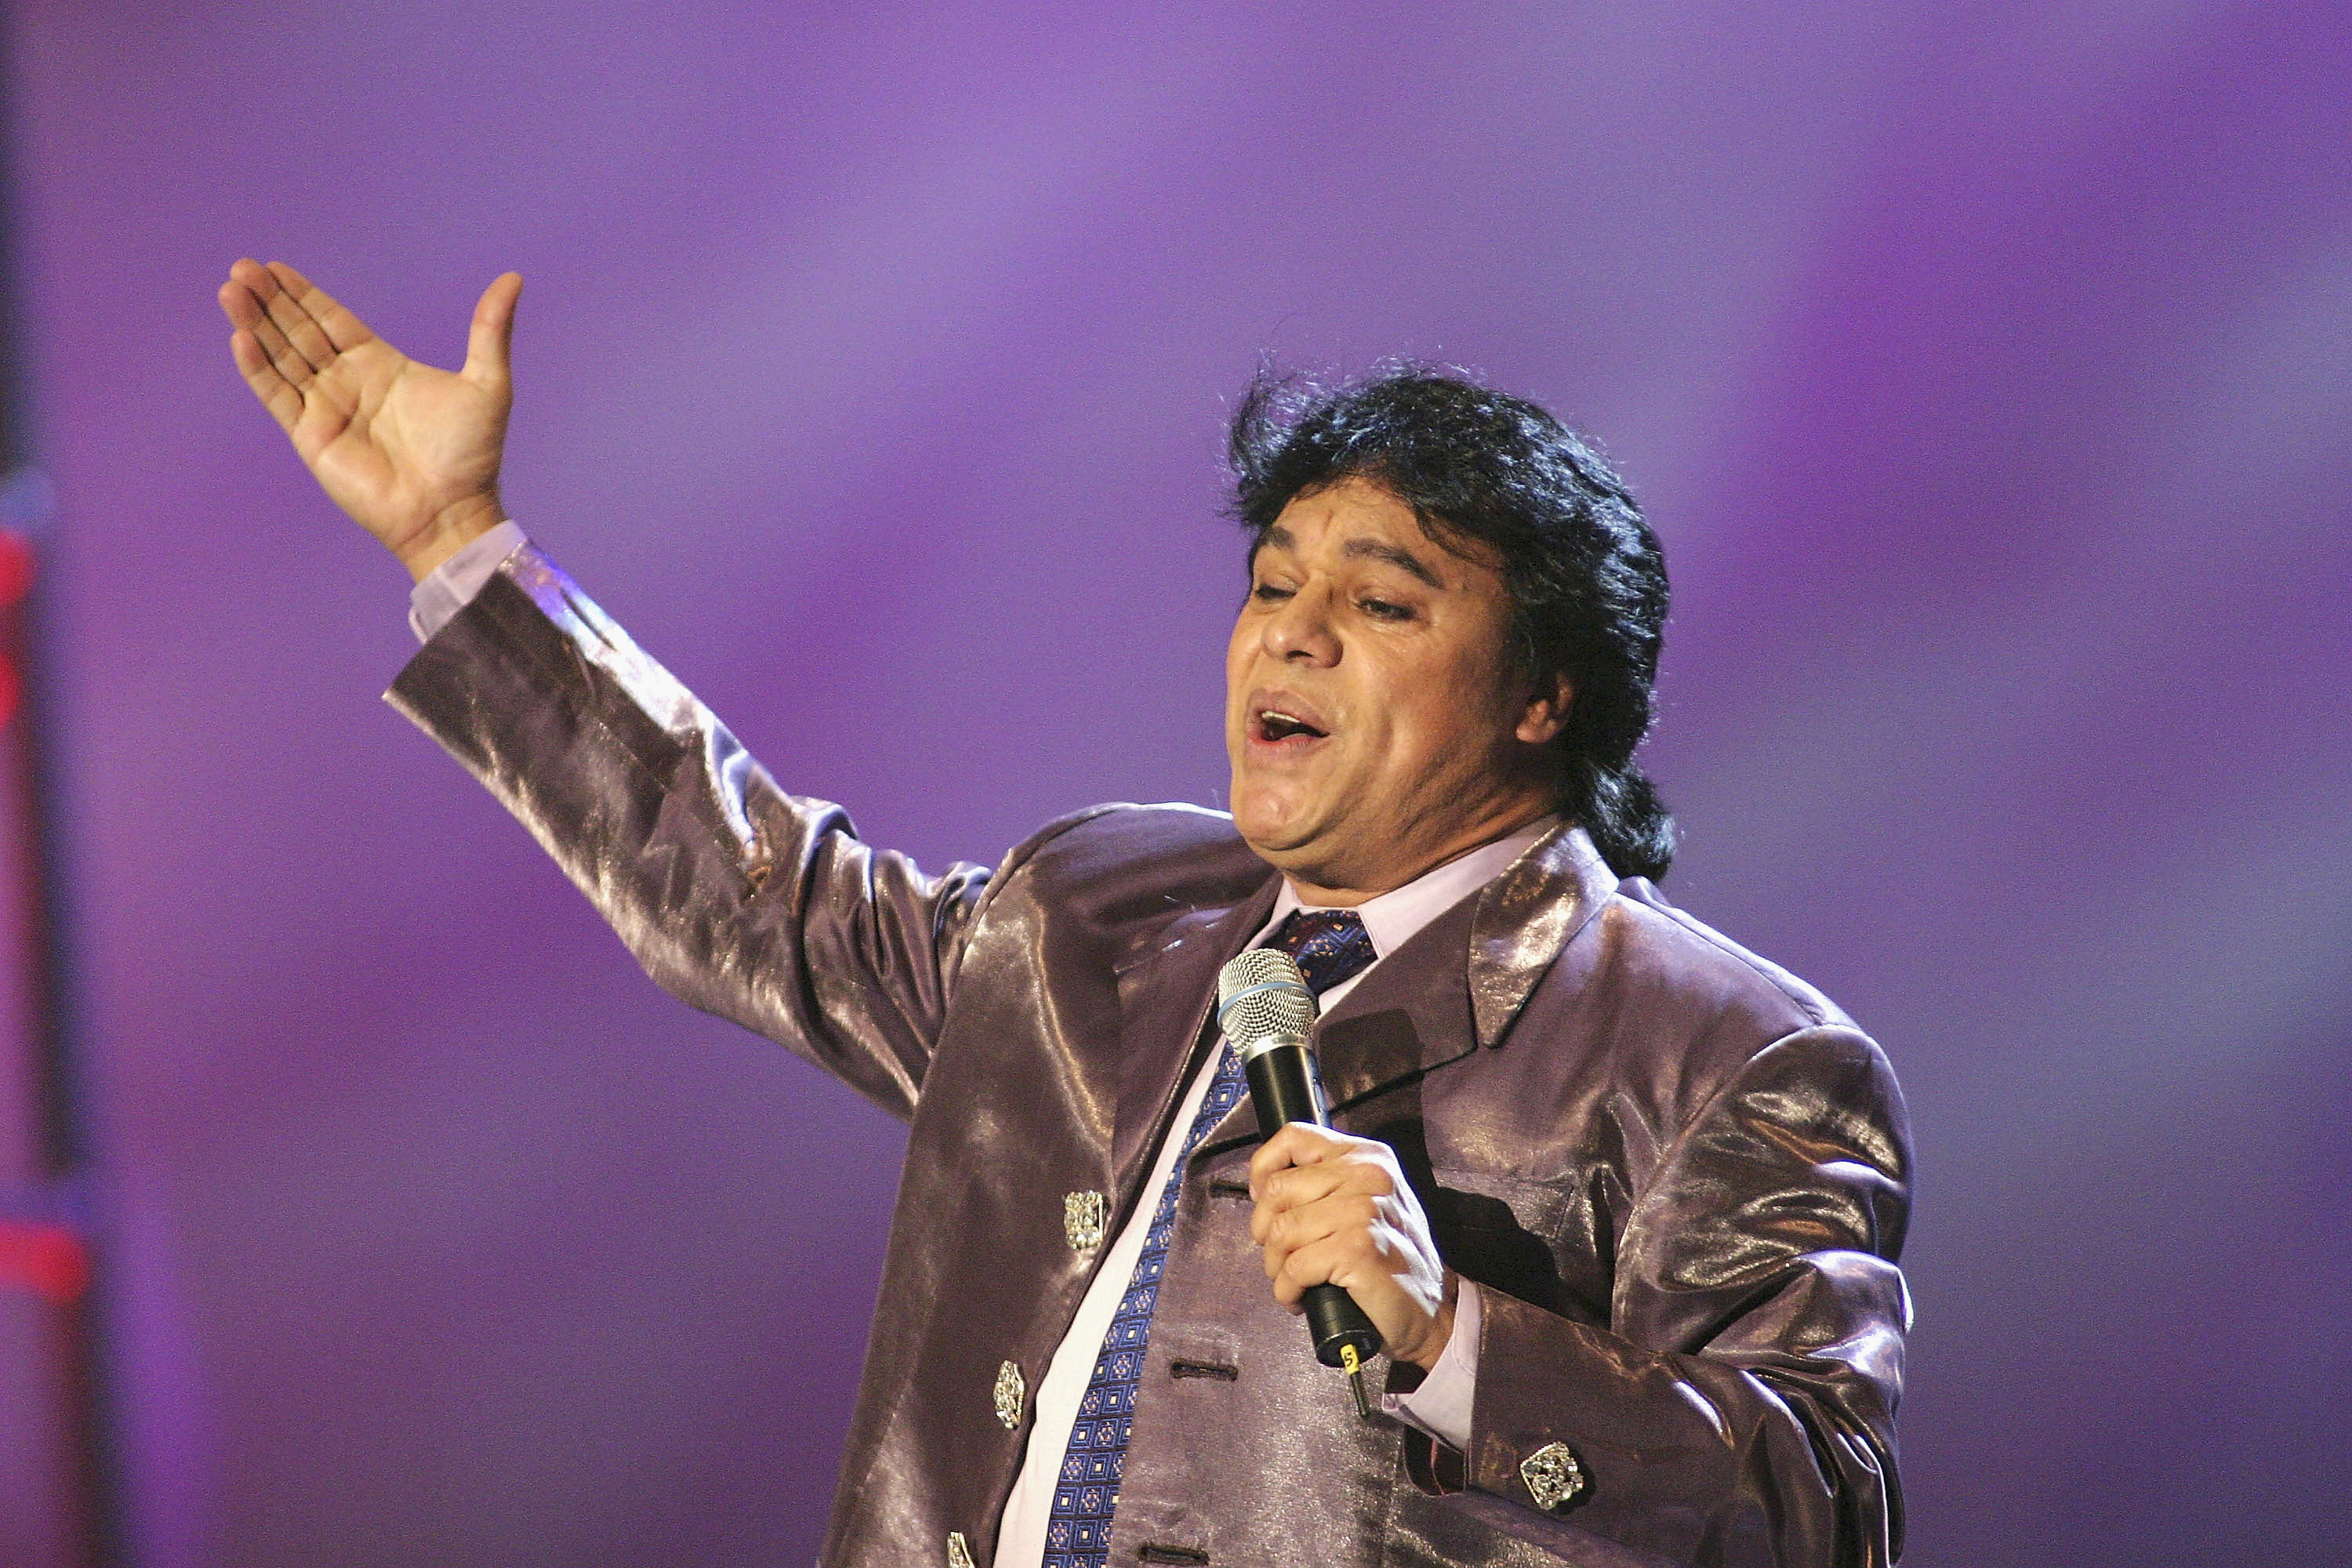 Juan Gabriel performs at the 2003 Latin Music Fan Awards Photo by Giulio Marcocchi /Getty Images